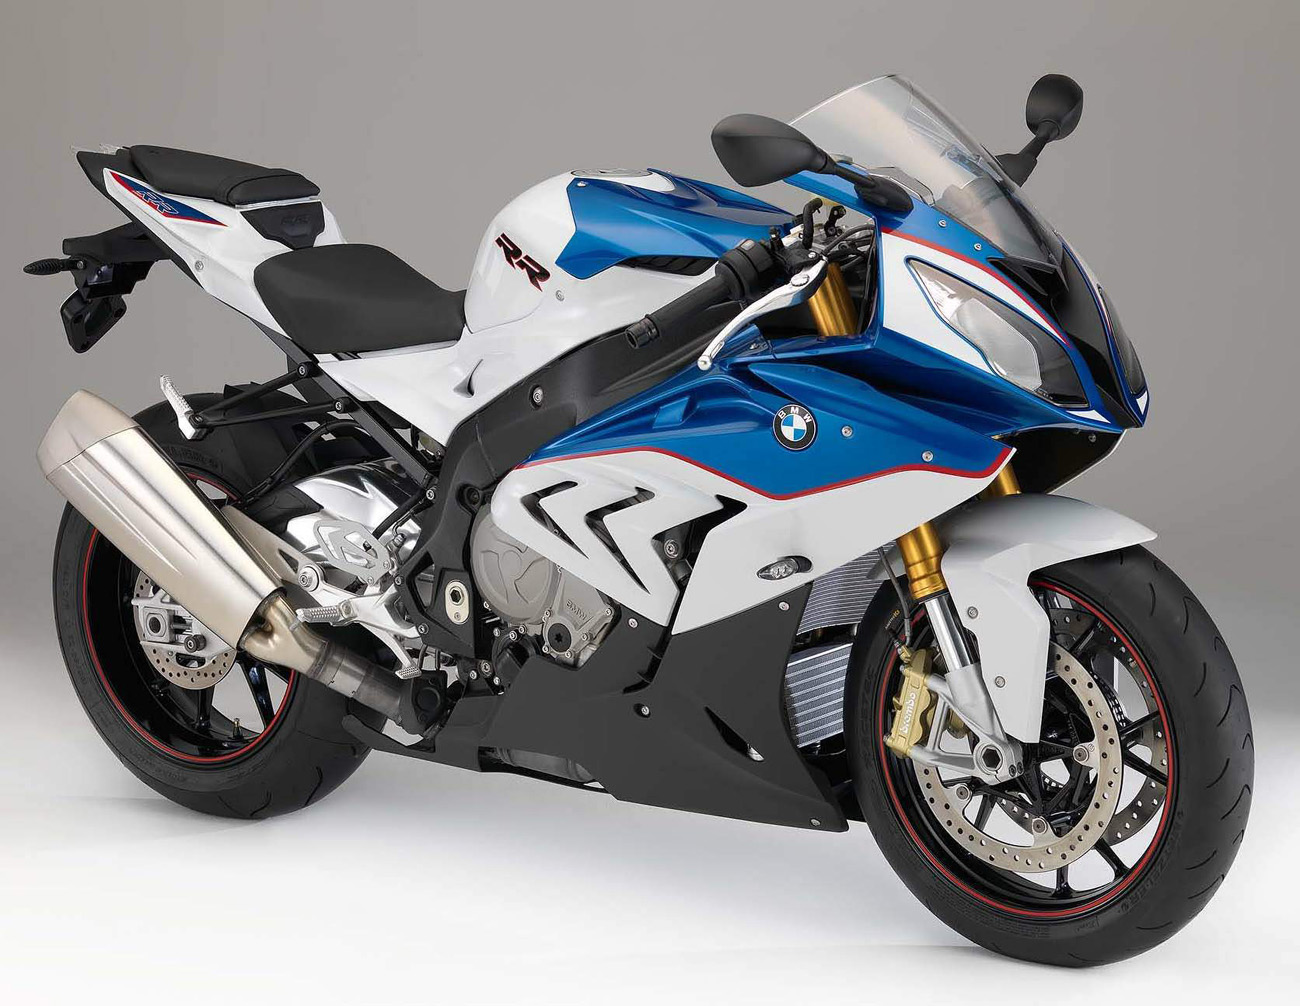 2015 BMW S1000RR- First Ride Sportbike Motorcycle Review- Photos- Specs